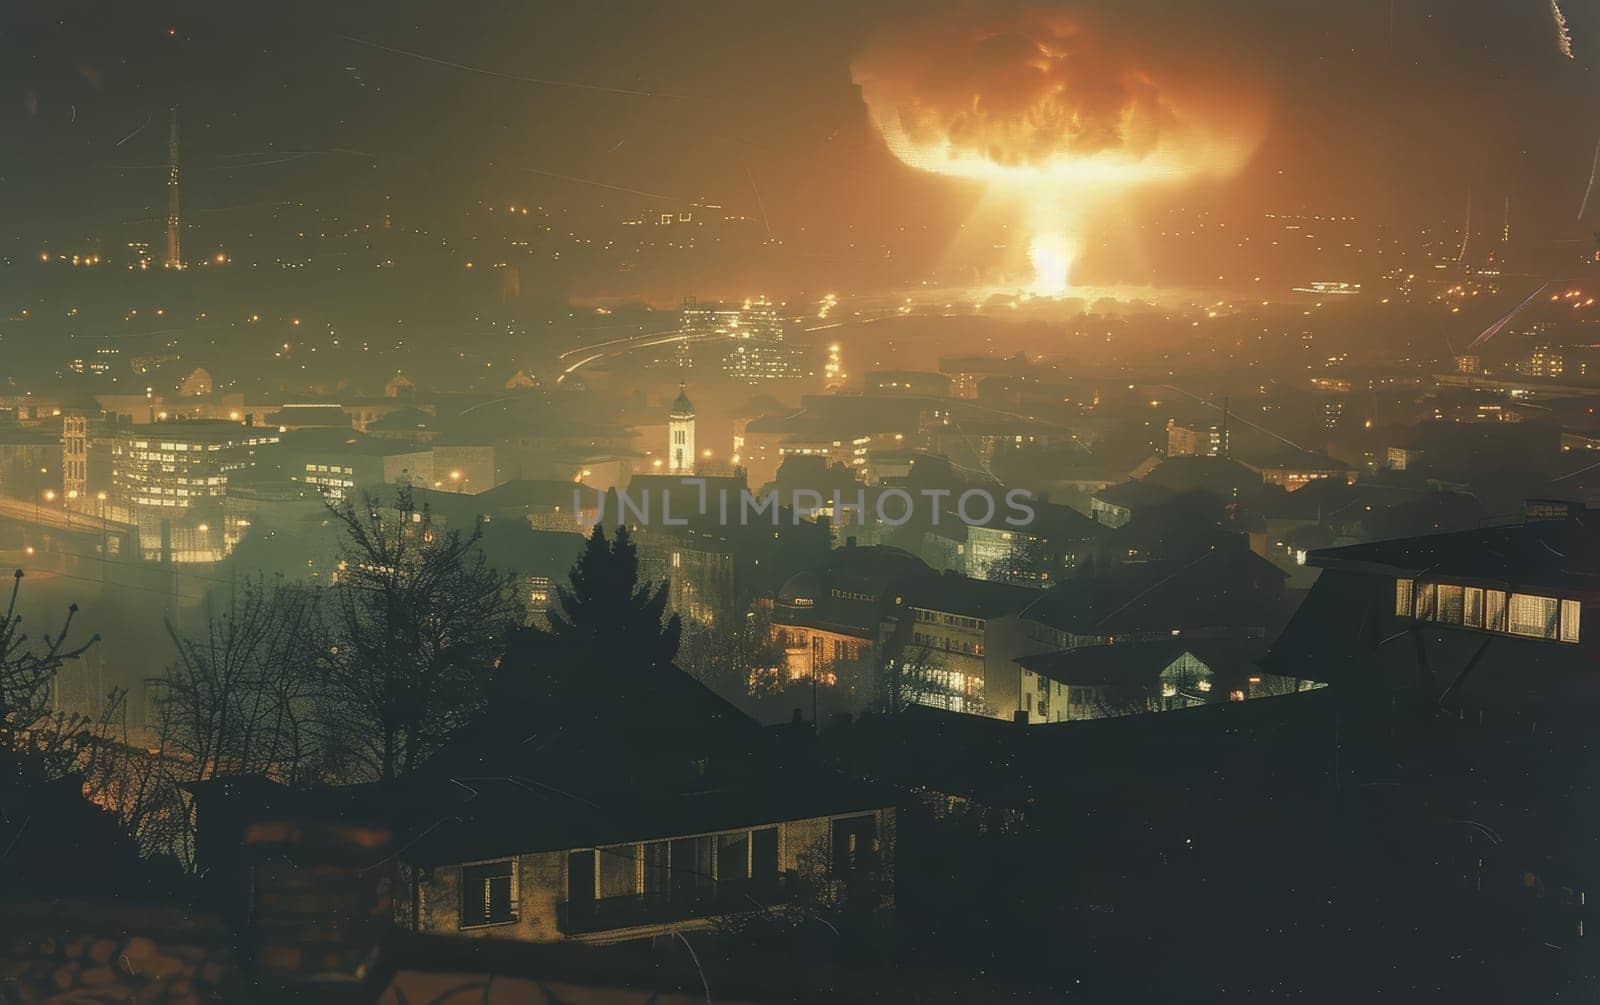 An ominous explosion illuminates a nighttime cityscape, casting a dramatic glow over the urban environment. The event captures a moment of intensity amidst the calm of the city's evening routine.. by sfinks